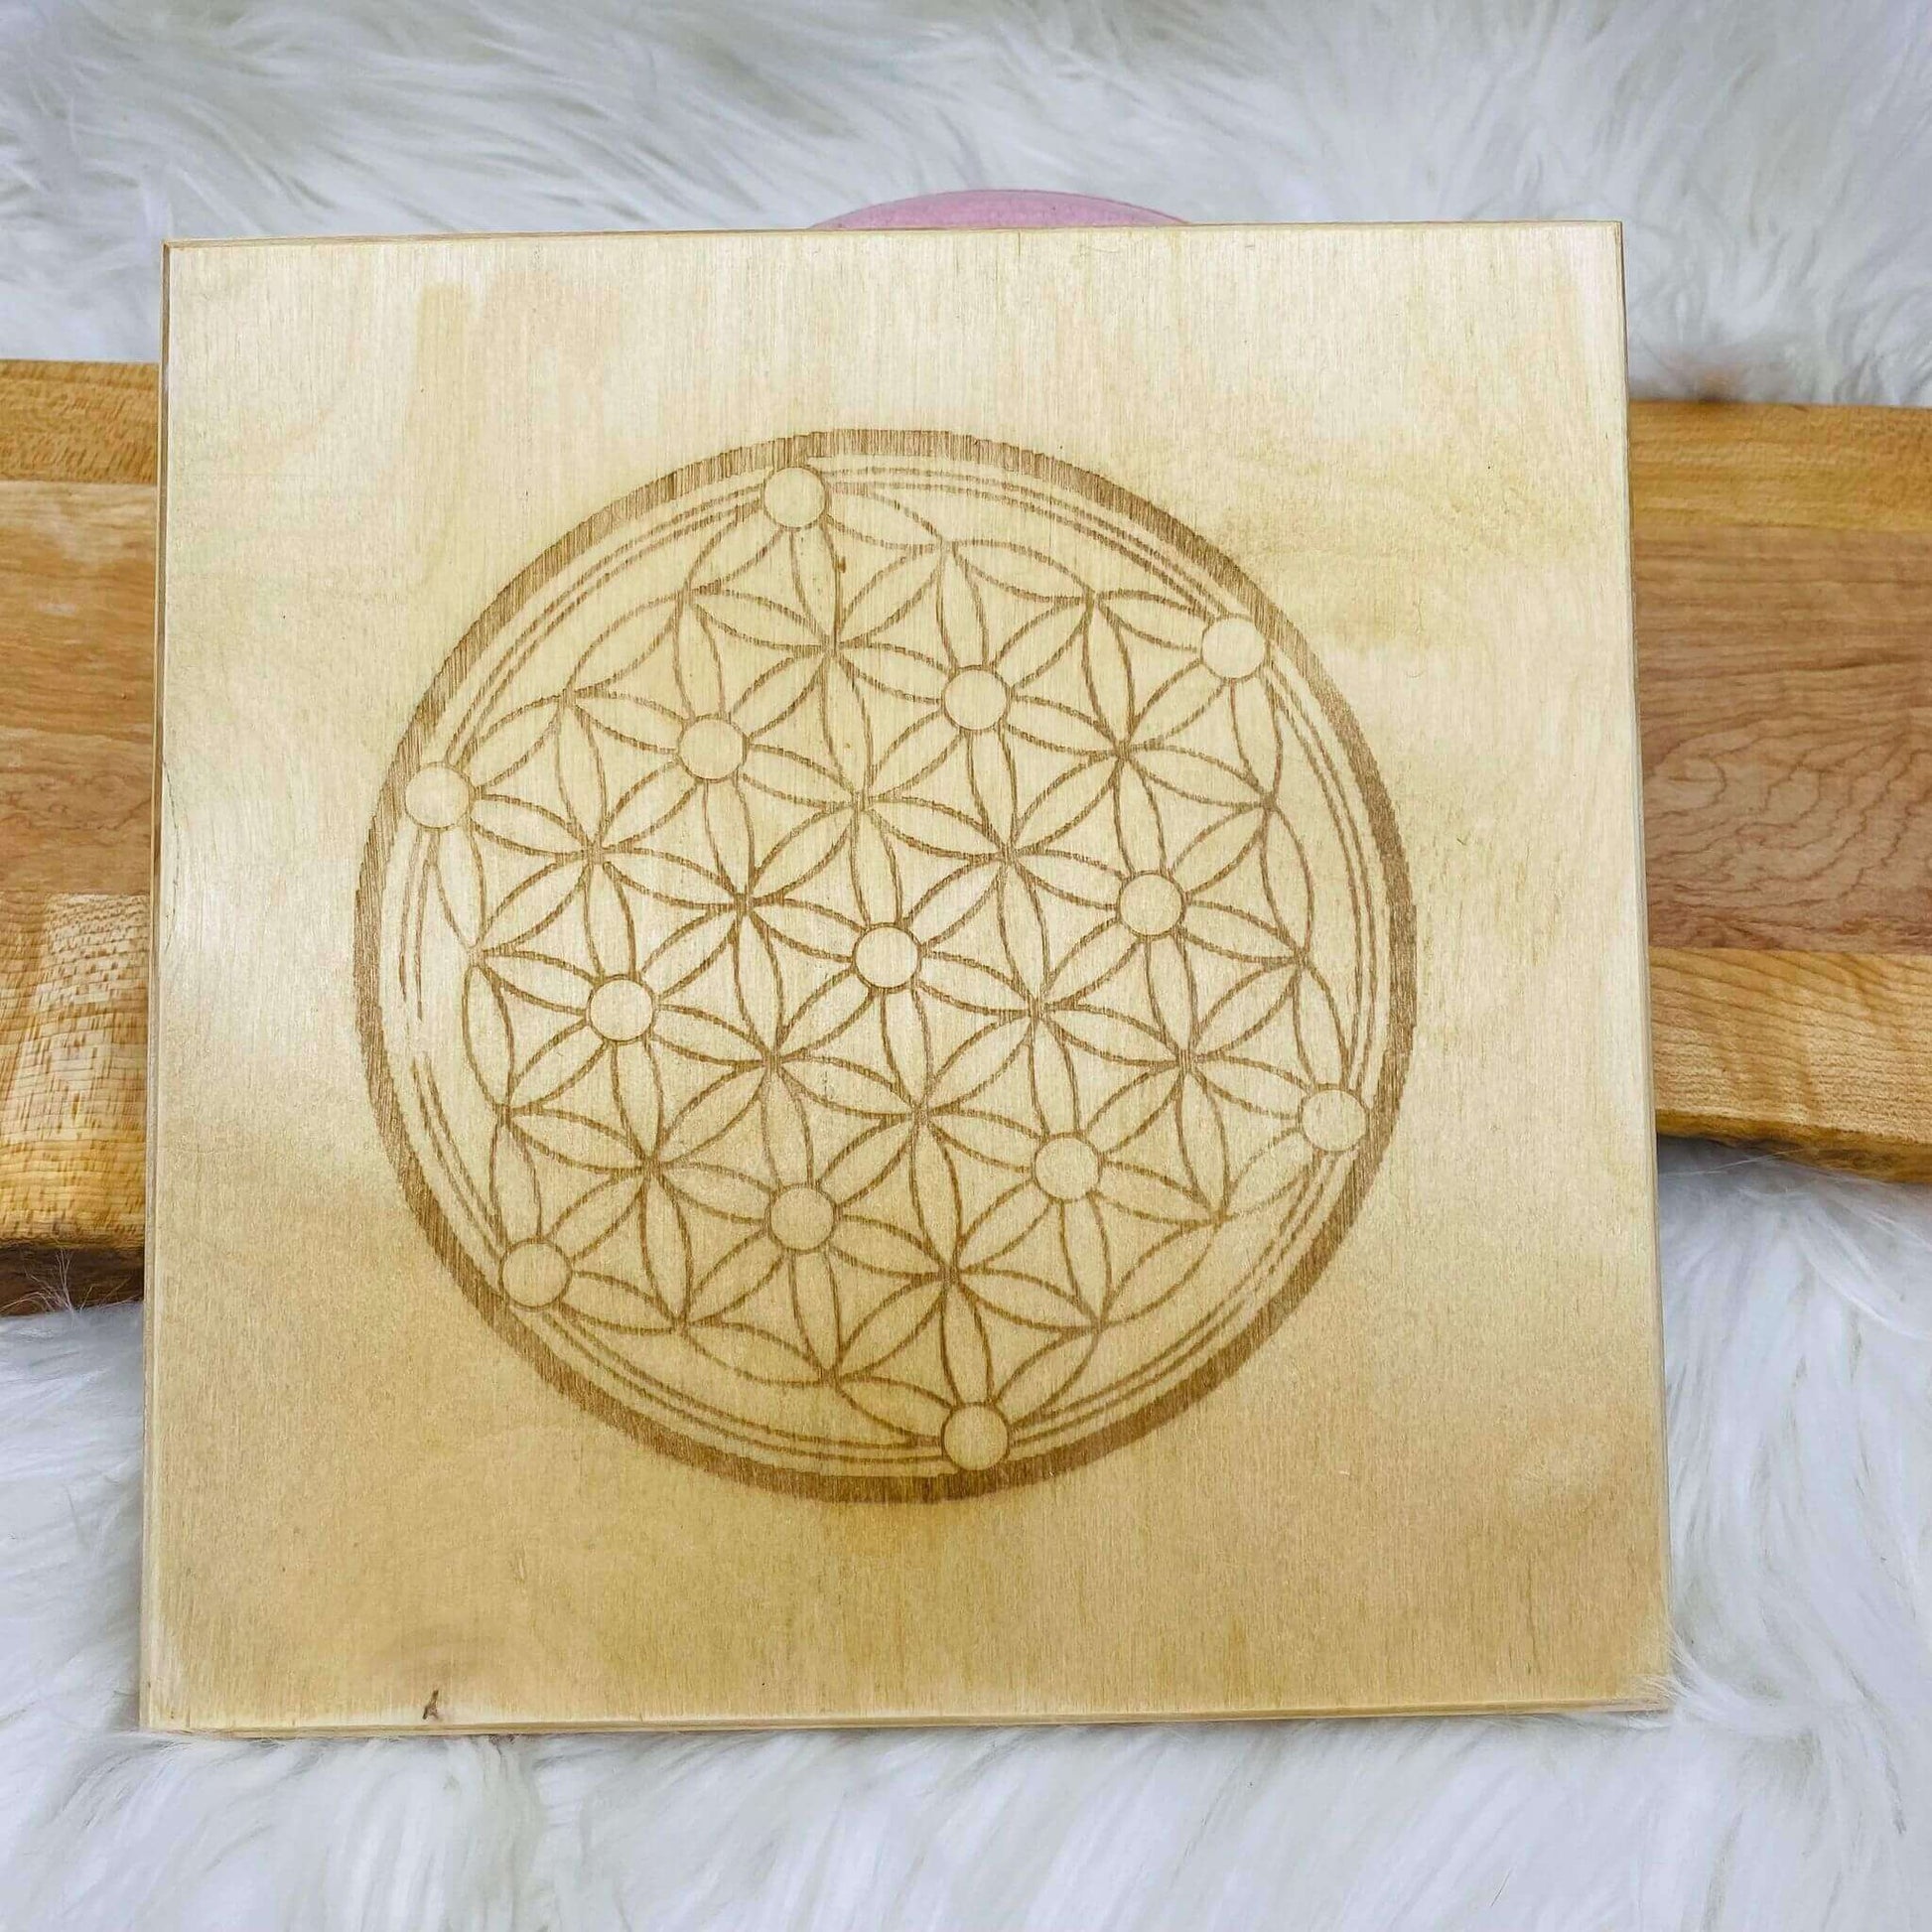 Two-sided wood grid (flower of life/ Sri Yantra) at $35 only from Spiral Rain